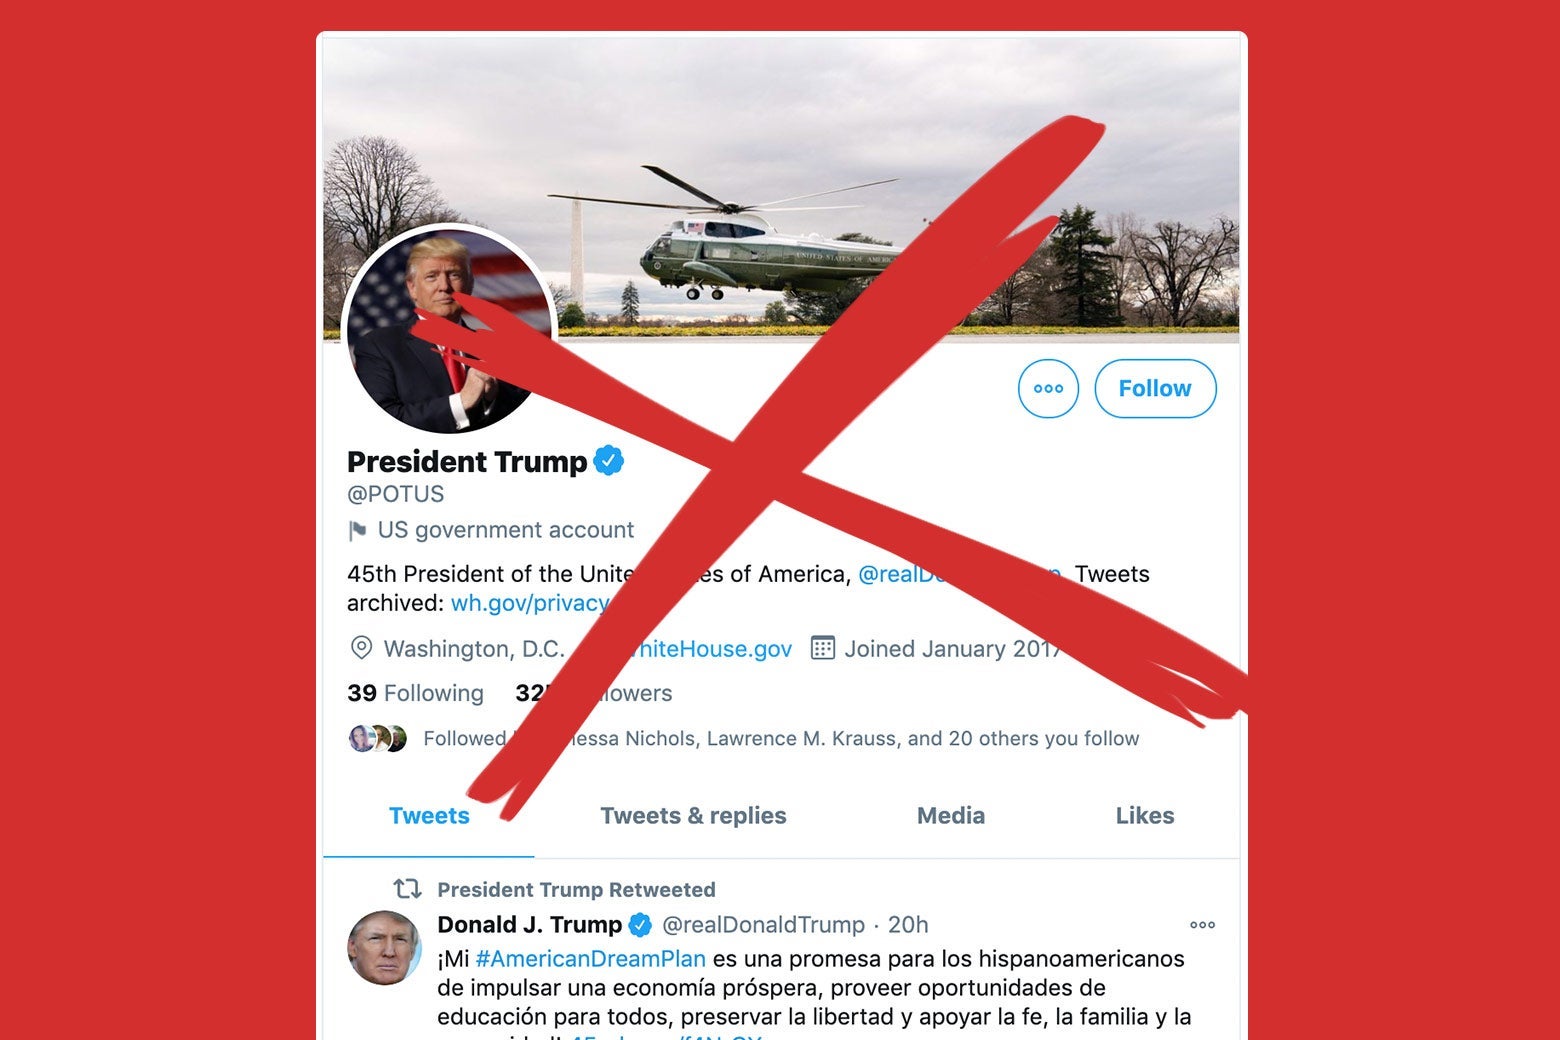 A red X over Donald Trump's Twitter profile